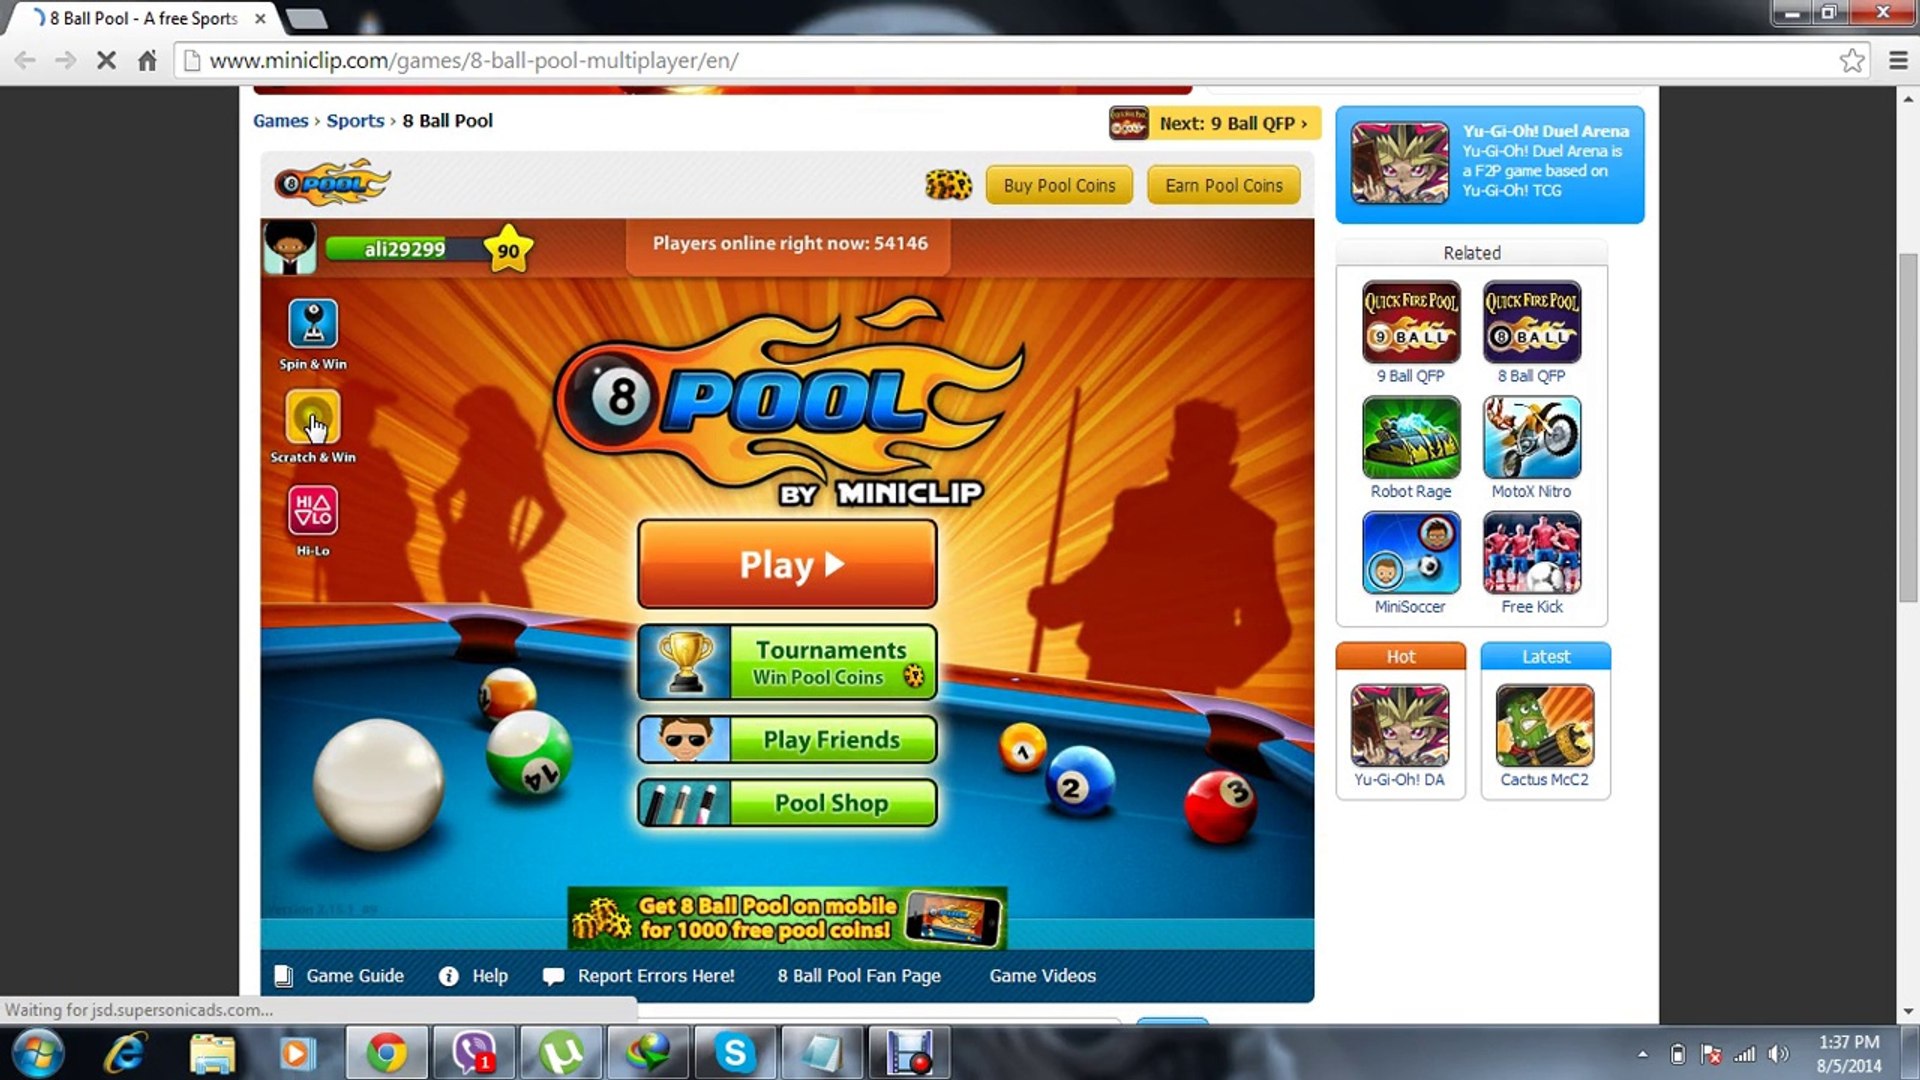 8 ball pool scratch and win hack 100% working!!! - 